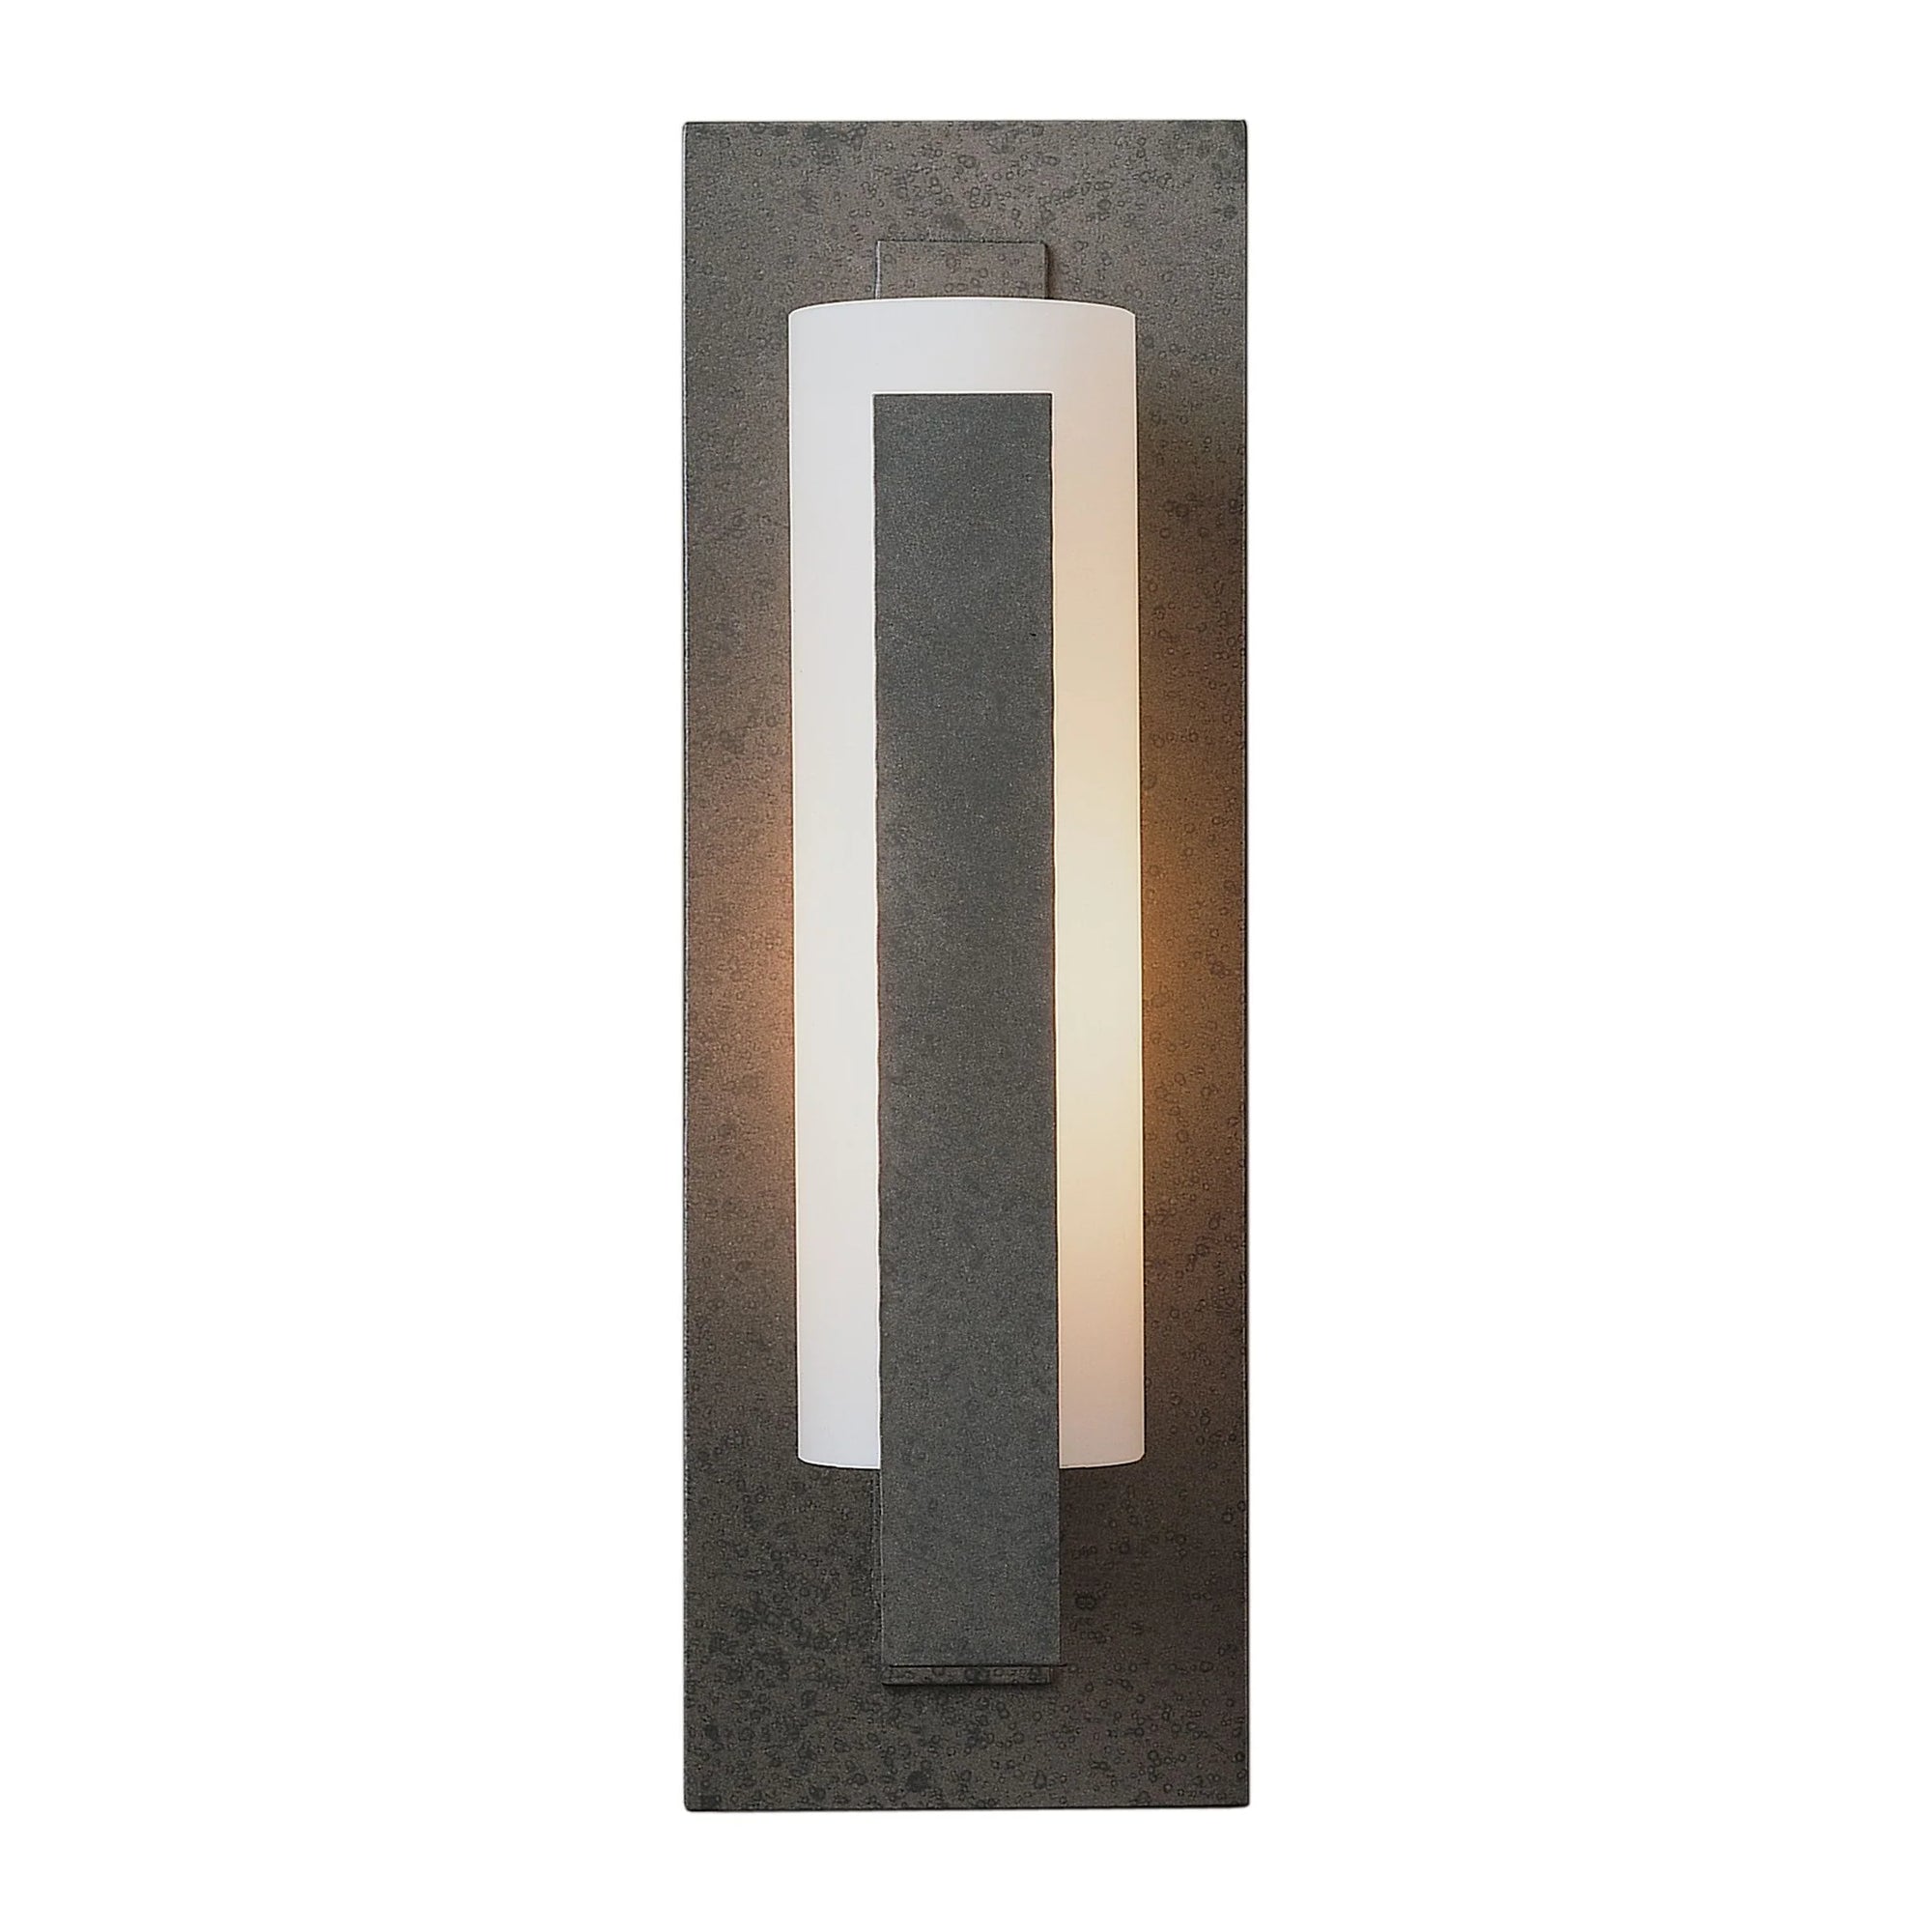 Hubbardton Forge Forged Vertical Bar Natural Iron Wall Sconce Lighting Affairs